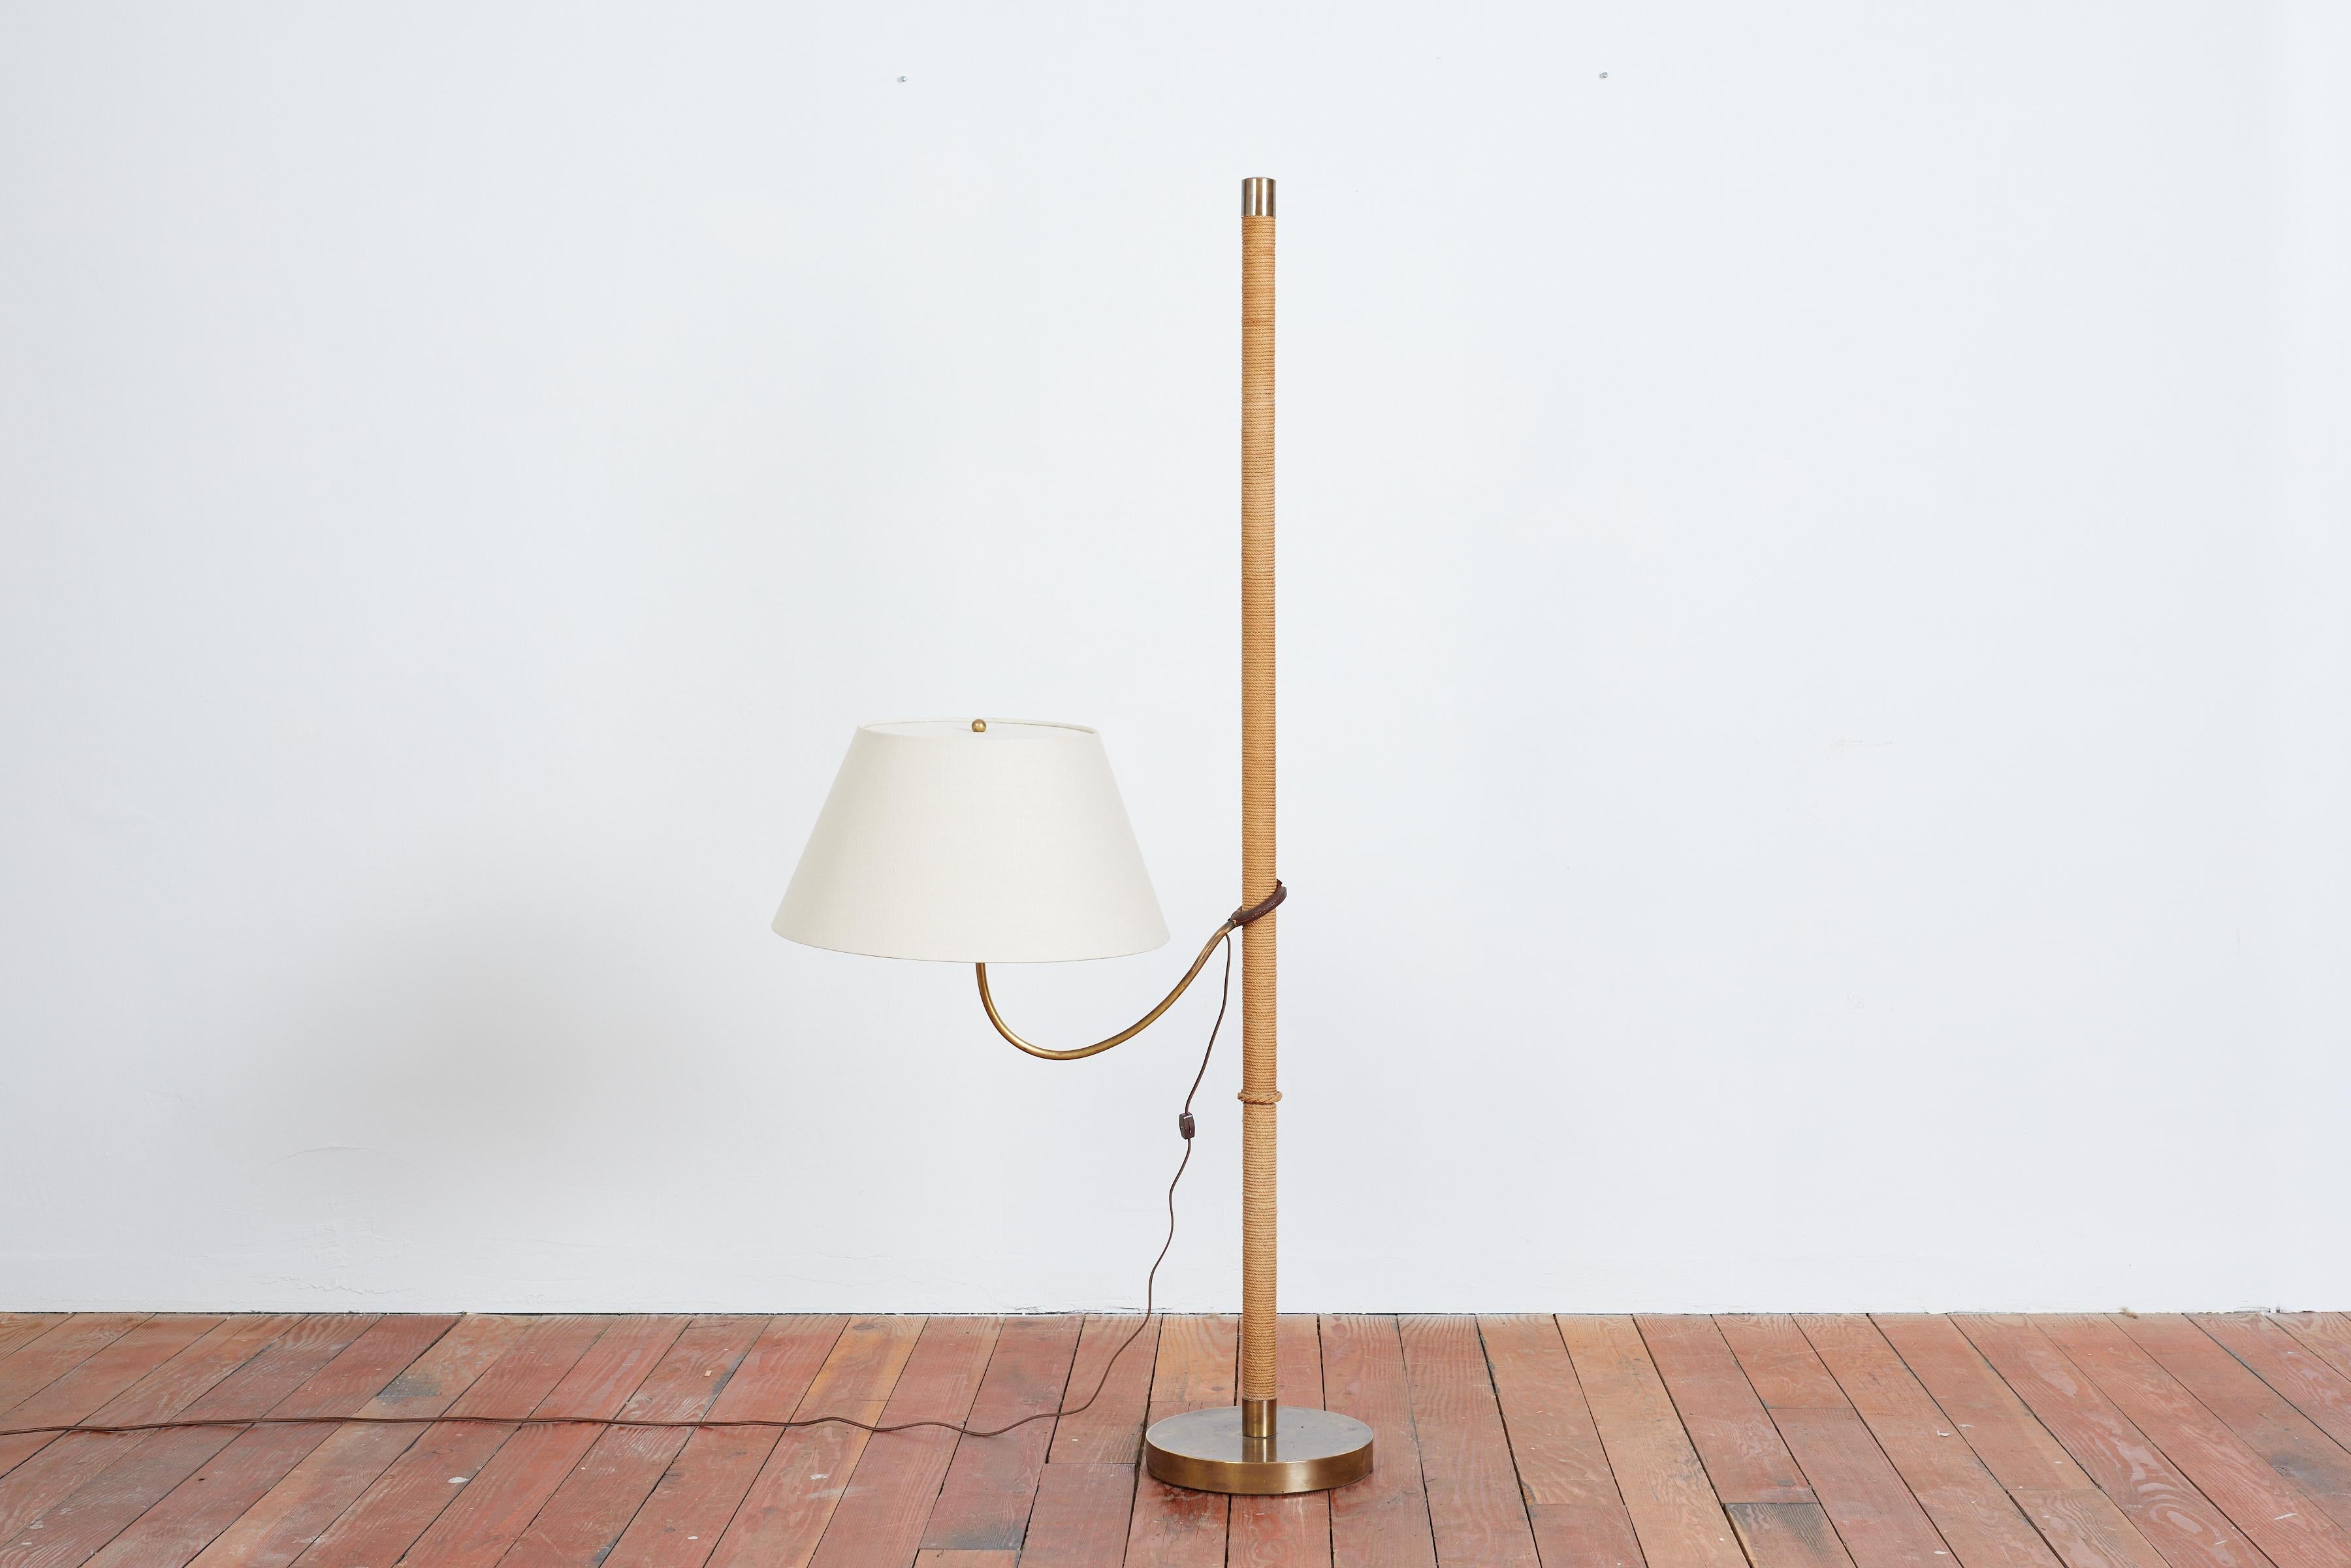 Mid-20th Century Italian Rope & Leather Floor lamp - 1950s For Sale